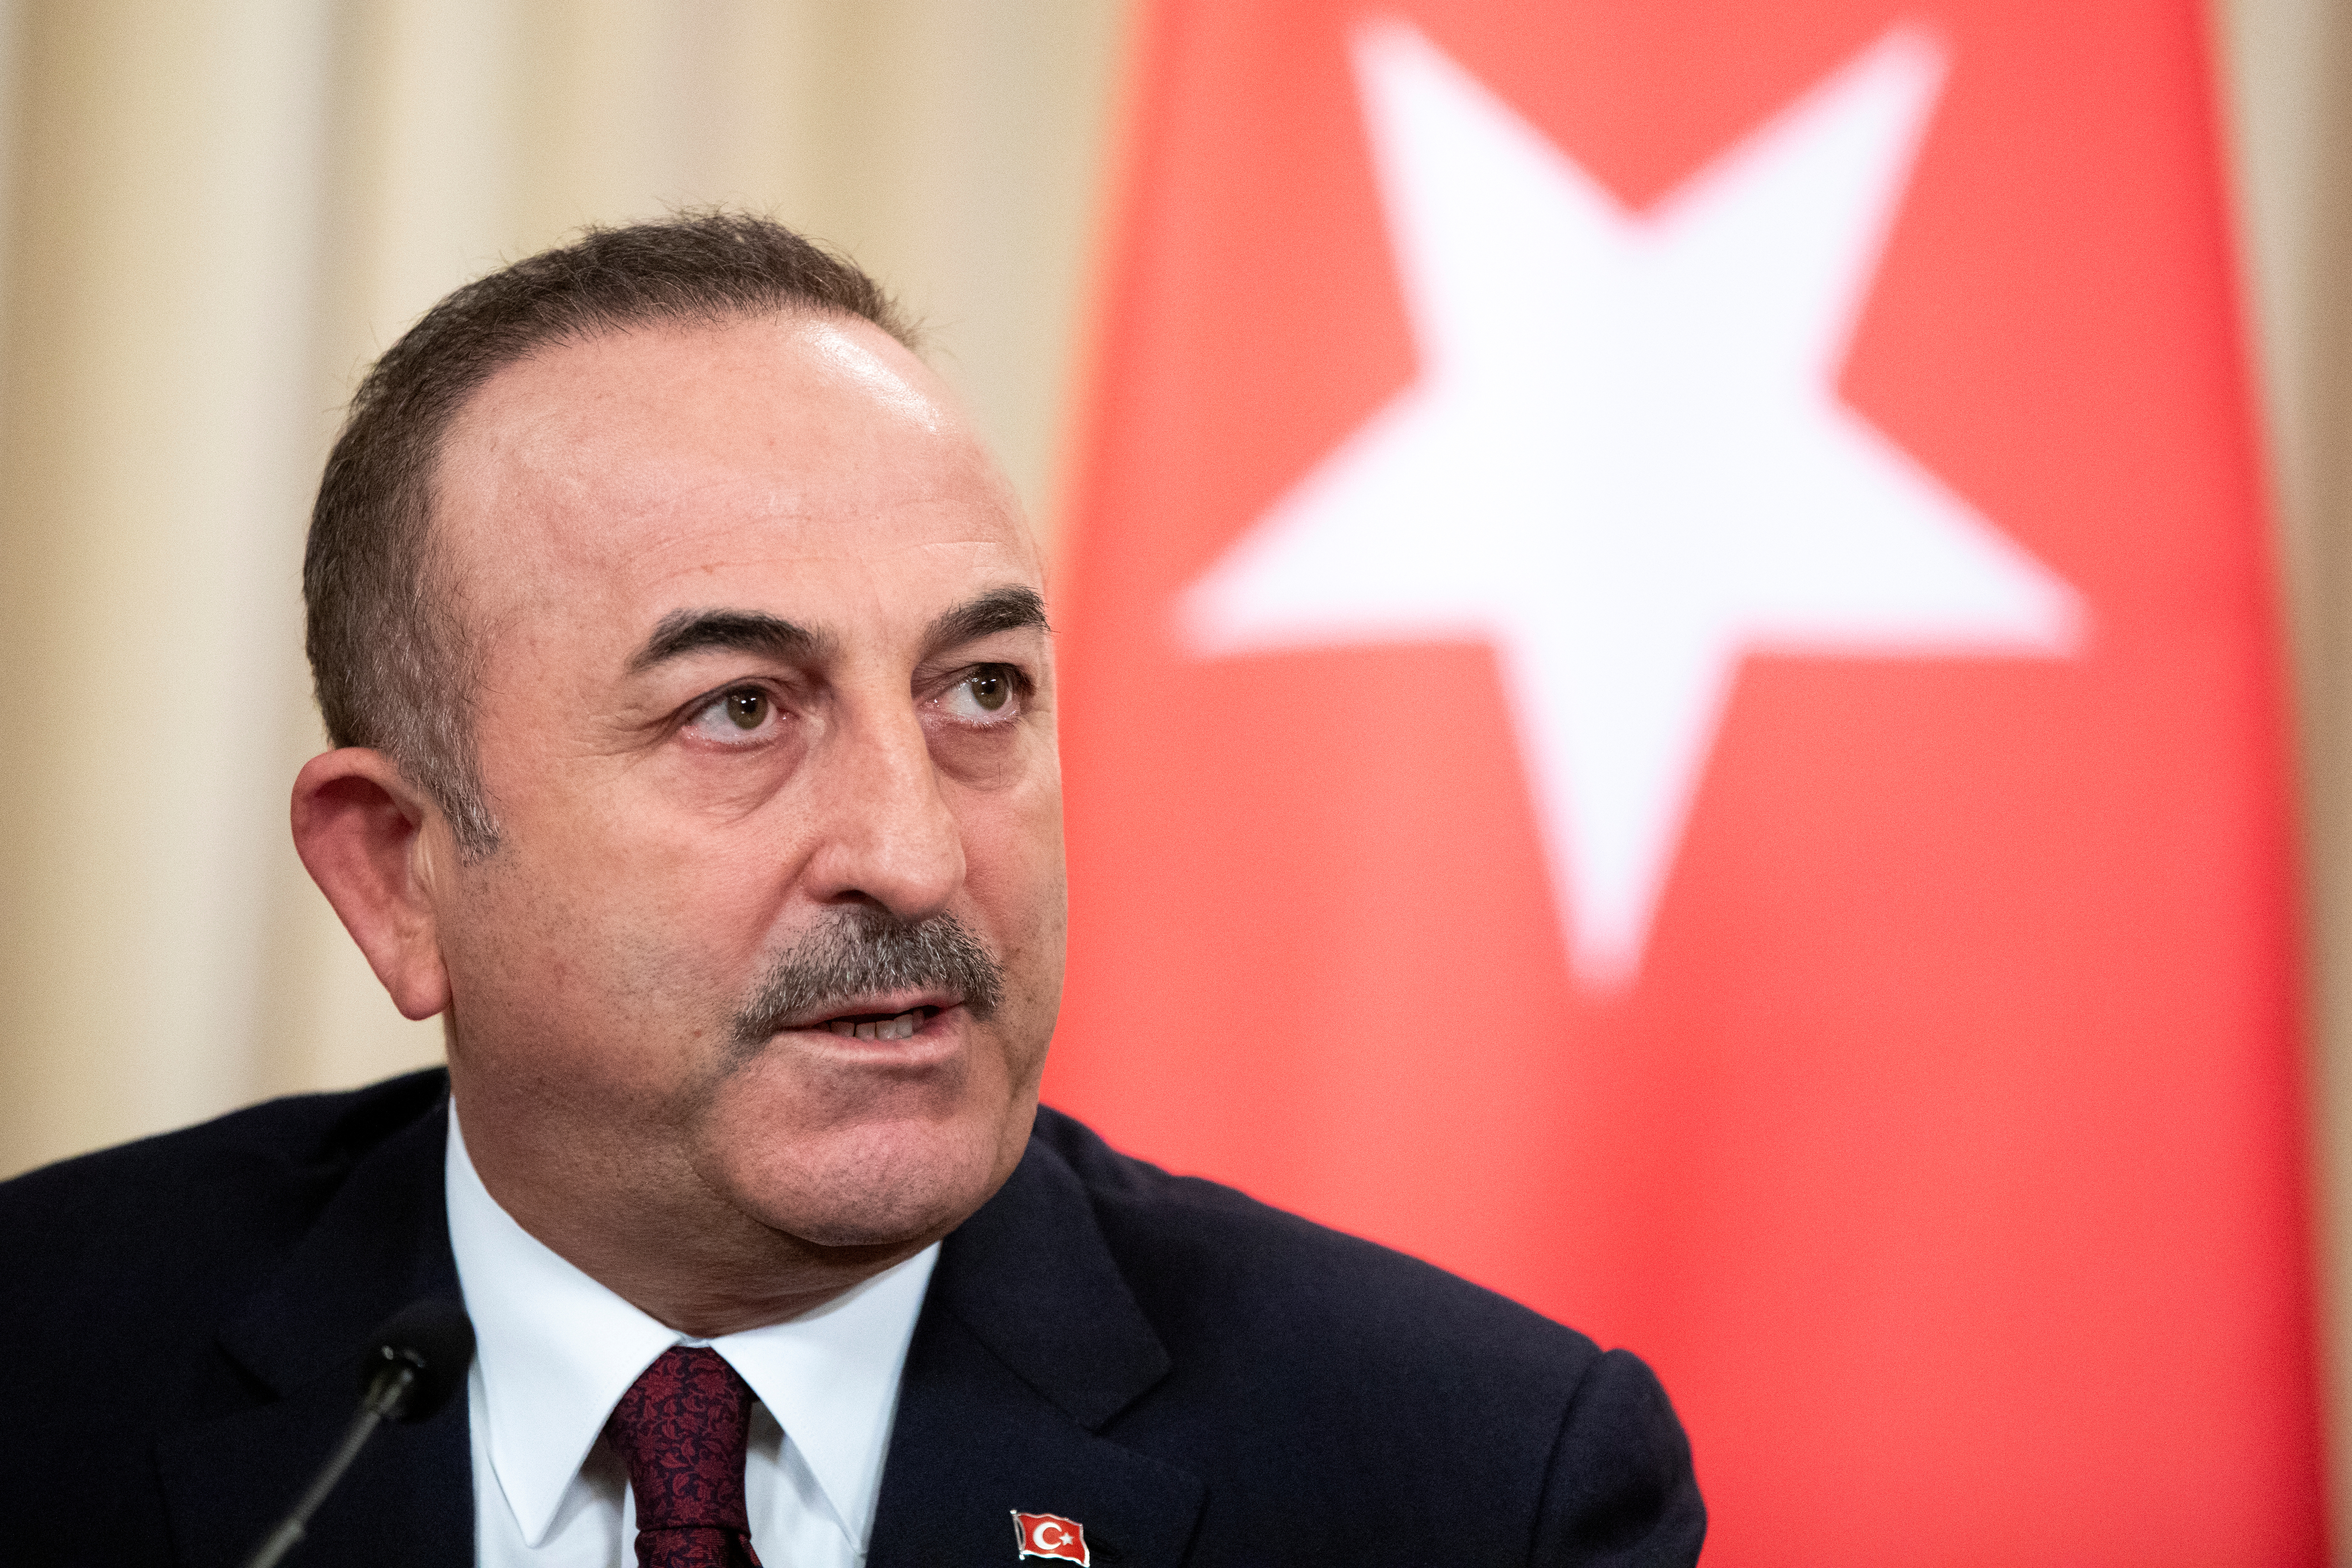 Turkish Foreign Minister Mevlut Cavusoglu speaks during a joint news conference following talks with Russian Foreign Minister Sergei Lavrov in Moscow